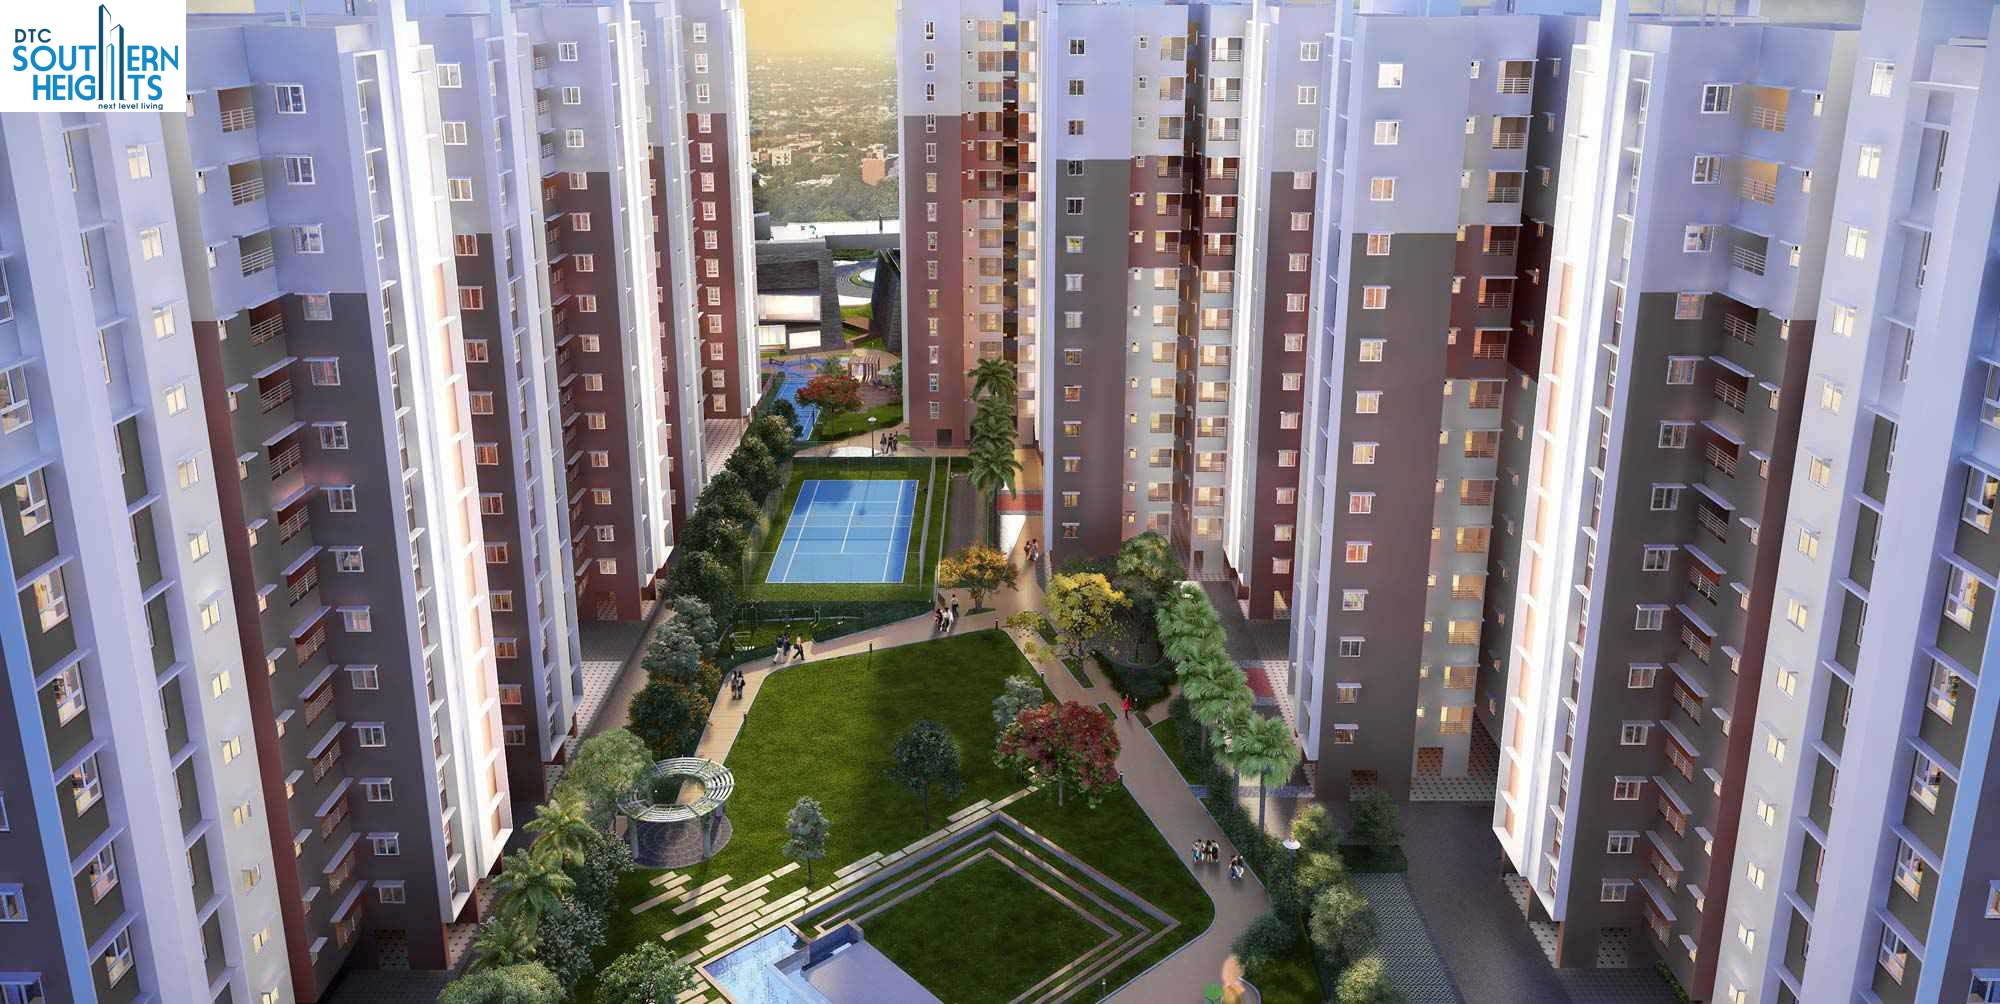 DTC Southern Heights is one of the biggest projects in South West Kolkata